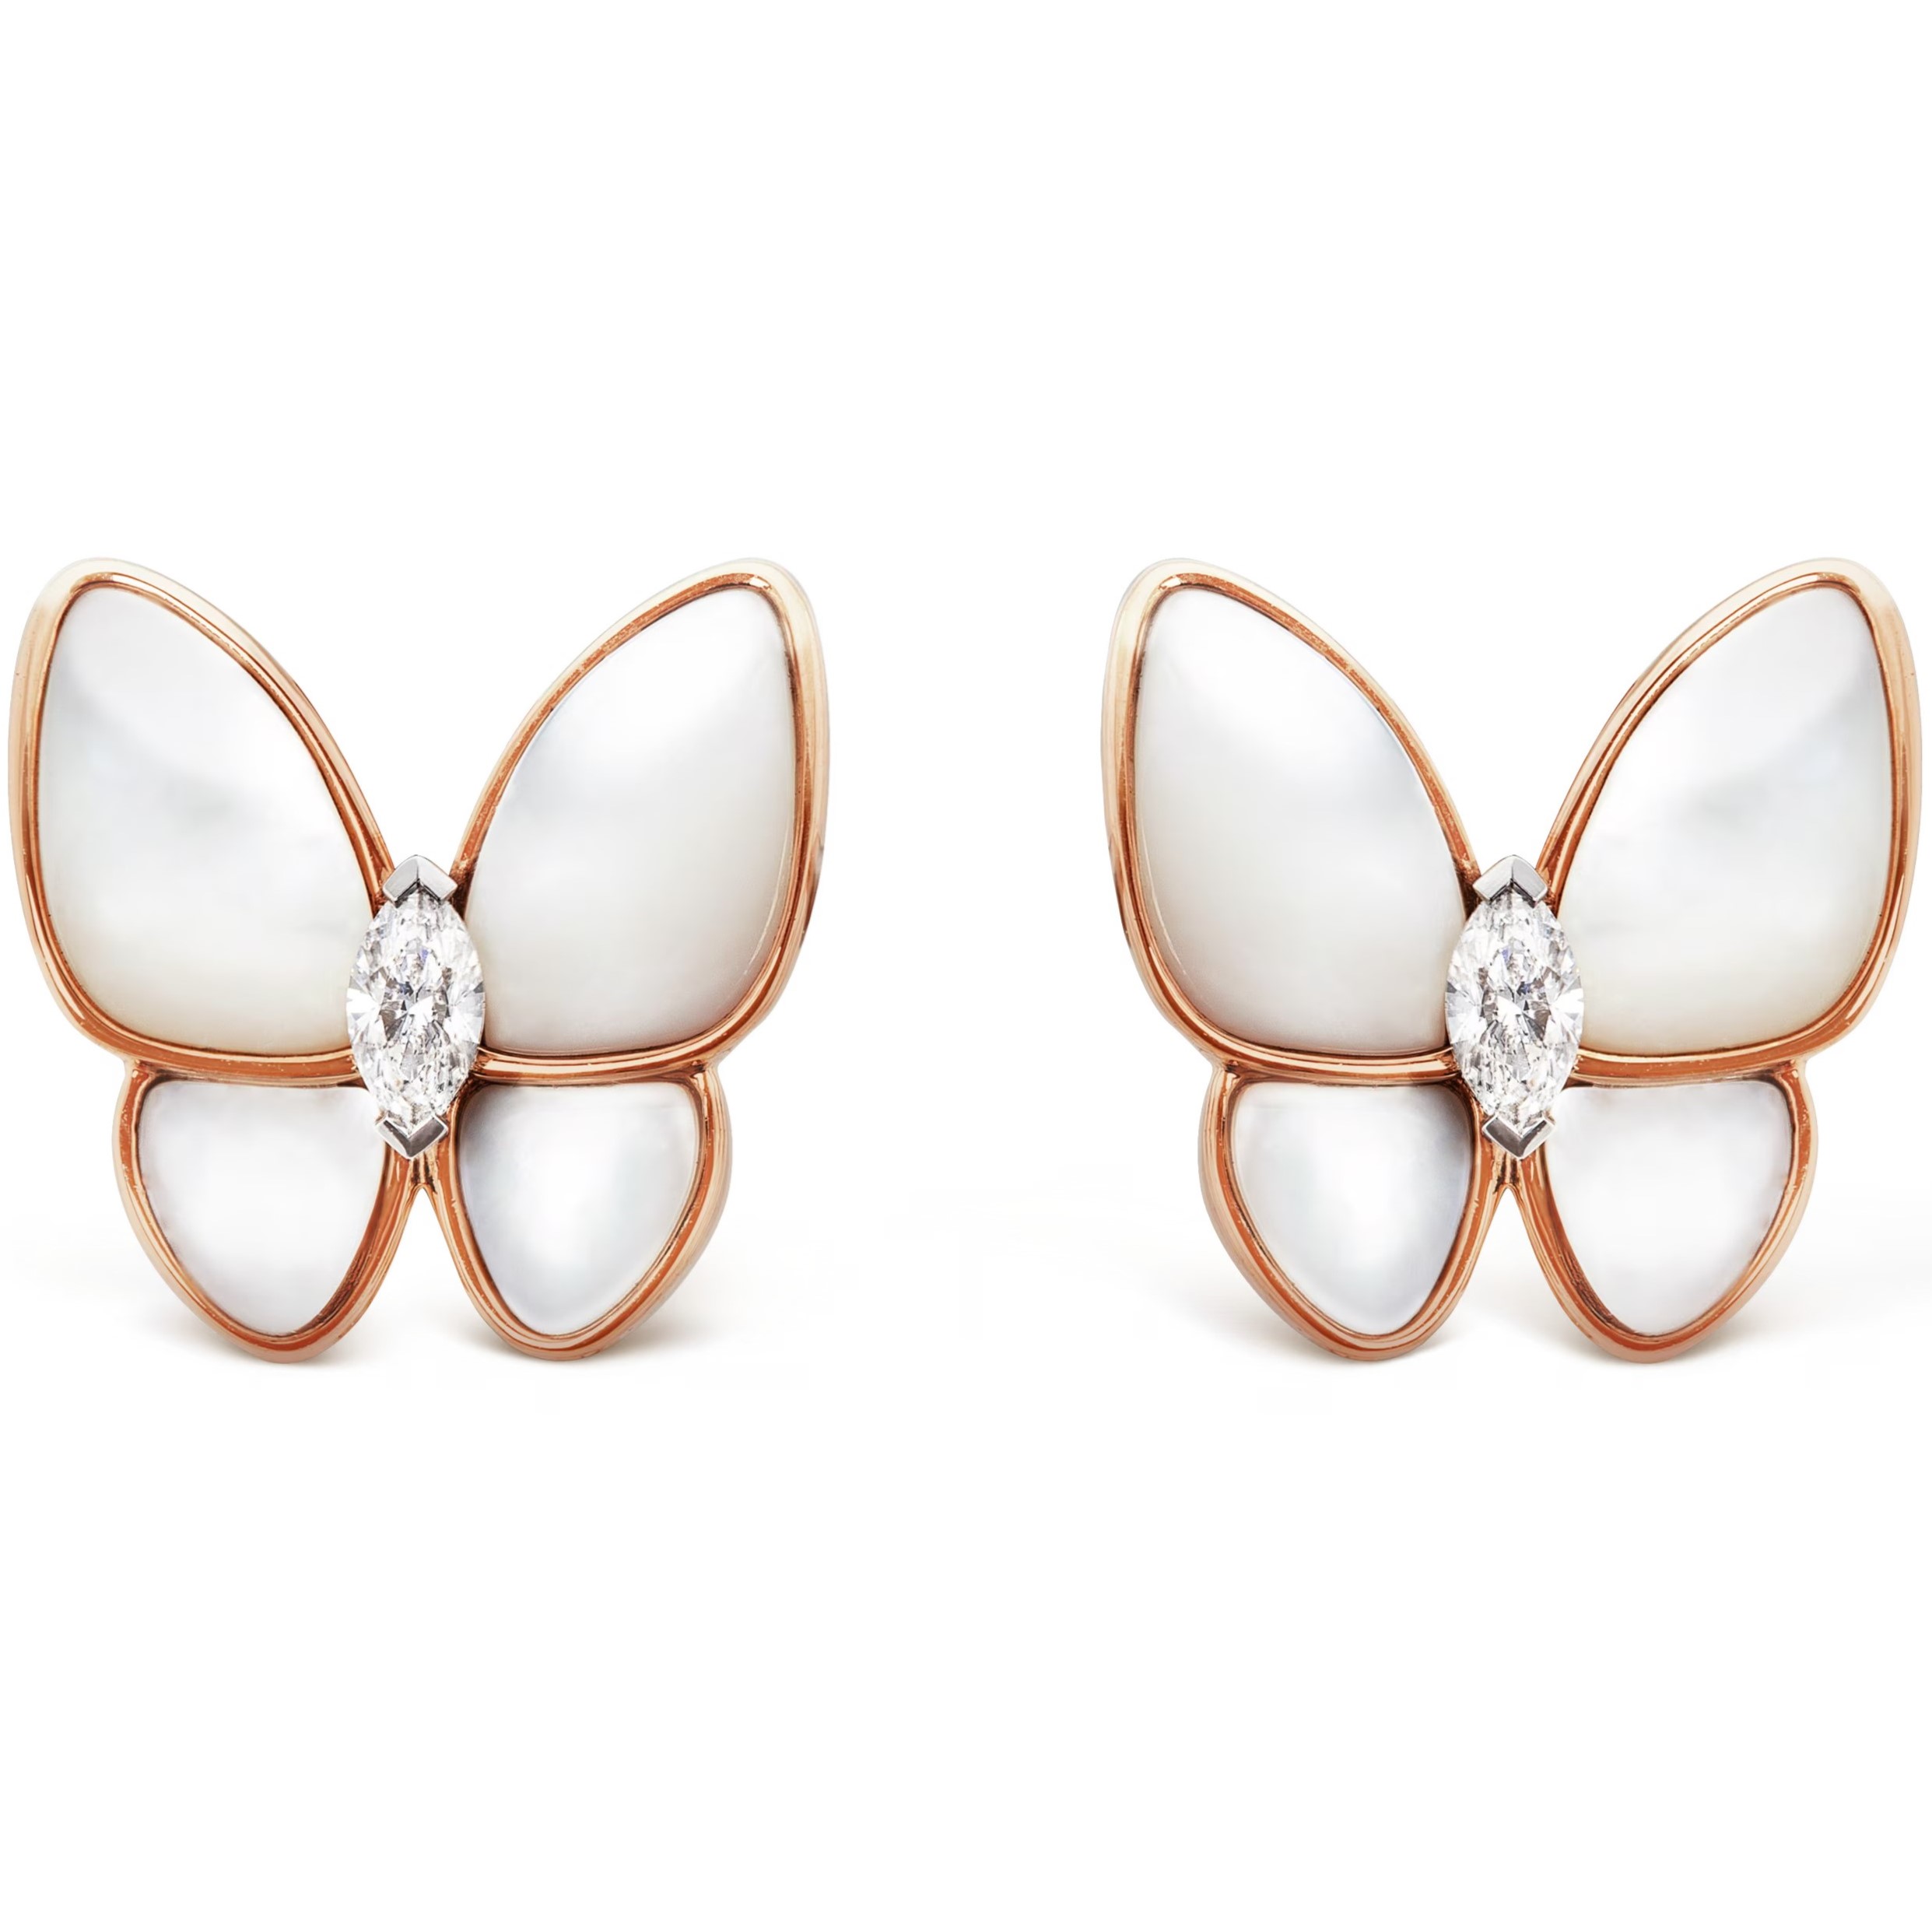 HOA TAI VAN CLEEF & ARPELS TWO BUTTERFLY EARRINGS ROSE GOLD WHITE MOTHER OF PEARL ROUND DIAMOND RHODIUM PLATED VCARO8FN00 2